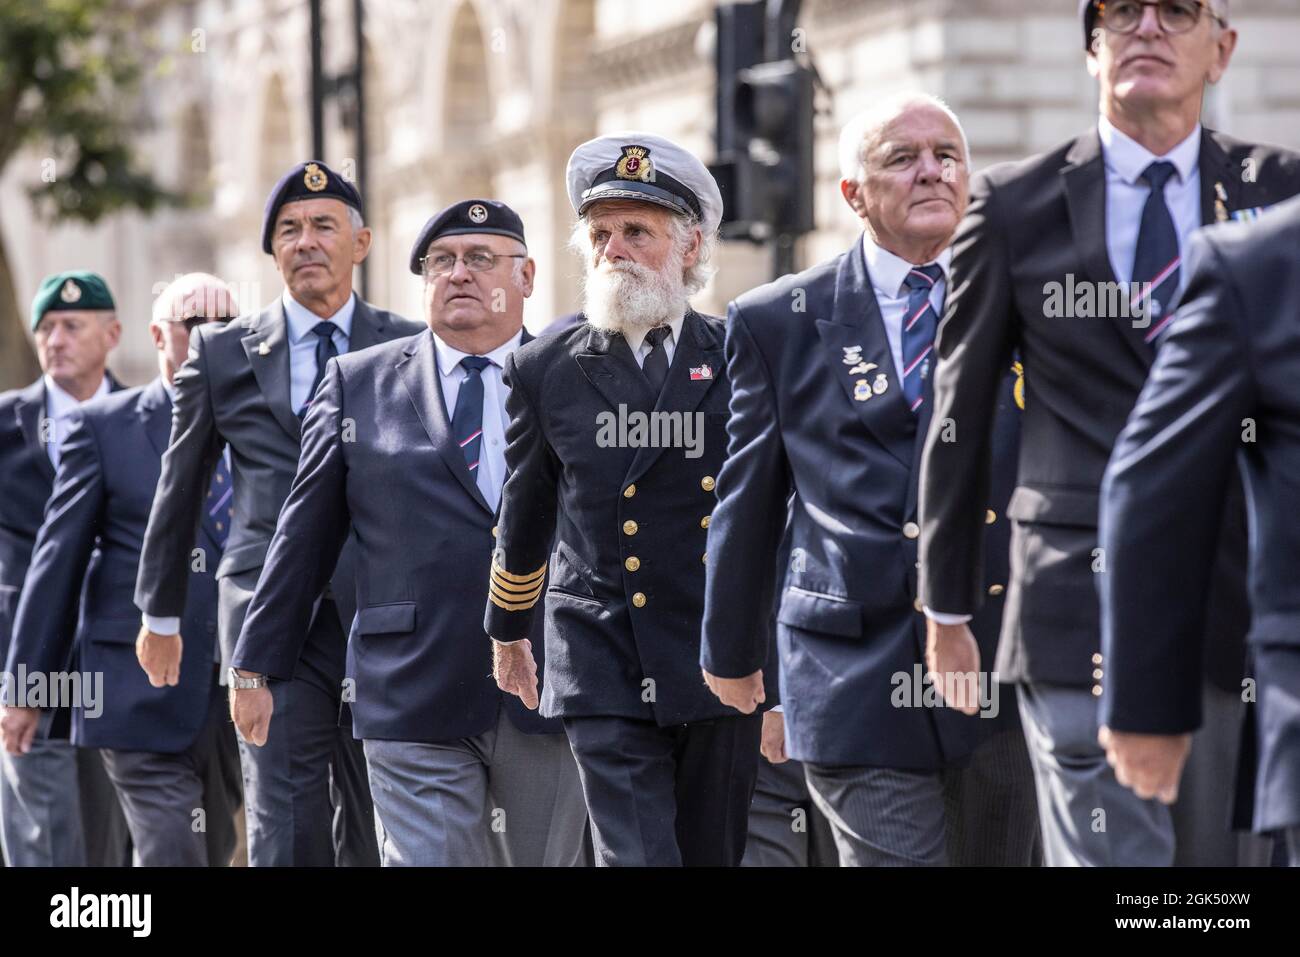 PHOTO:JEFF GILBERT 12th September 2021. Whitehall, London, UK ROYAL NAVY VETERANS MARCH FOR FALLEN COMRADES AT THE CENOTAPH IN WHITEHALL. This was the Stock Photo